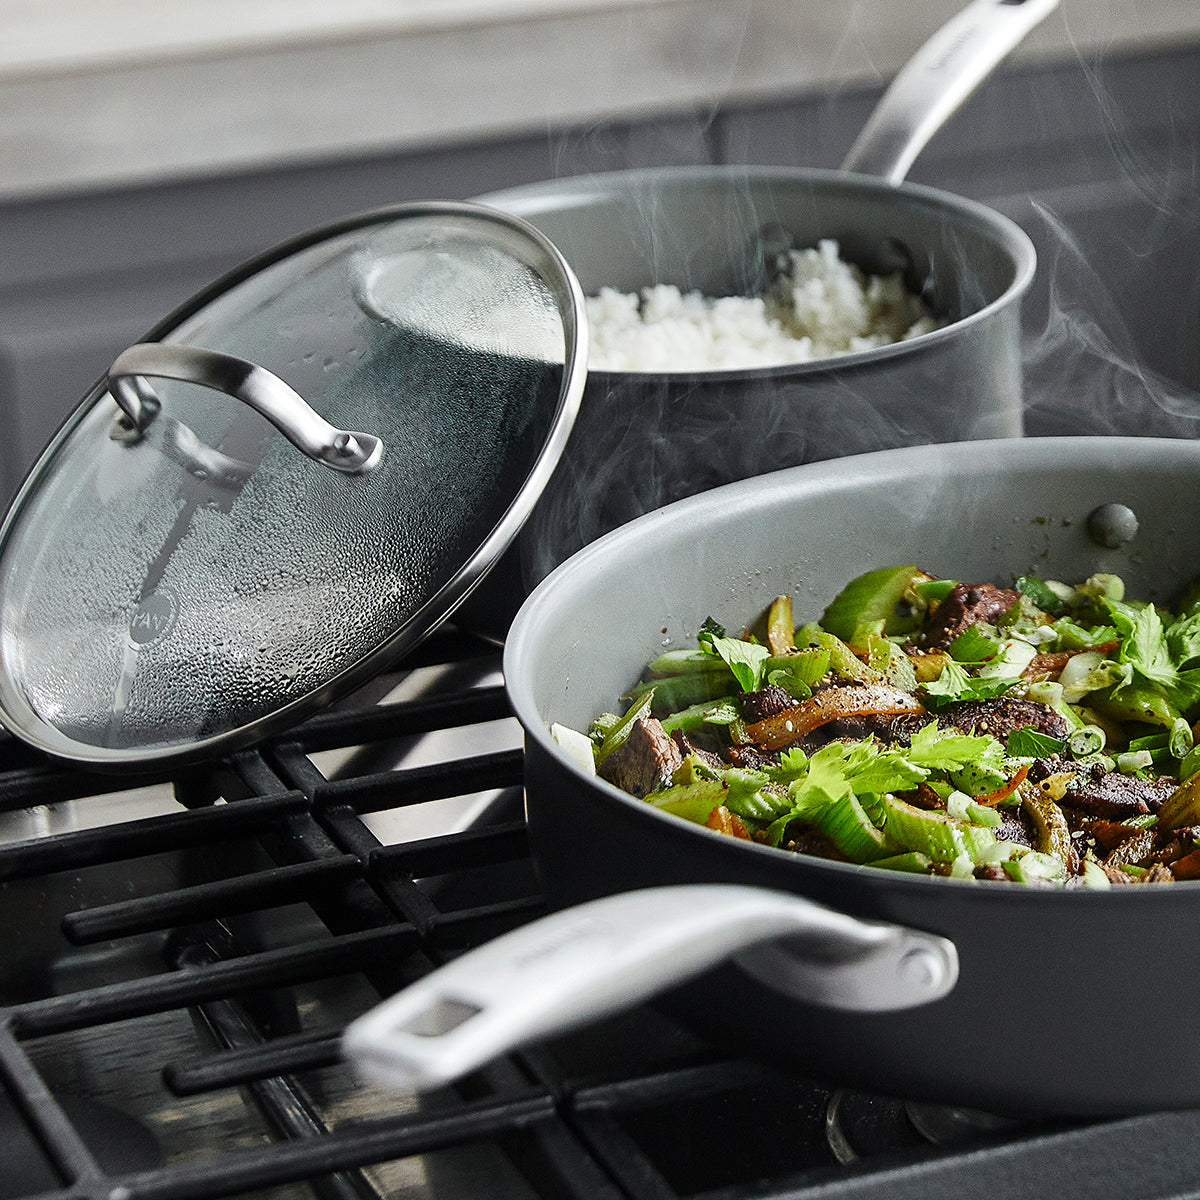 GreenPan Official Store - Cookware Sets, Top Rated Ceramic Nonstick